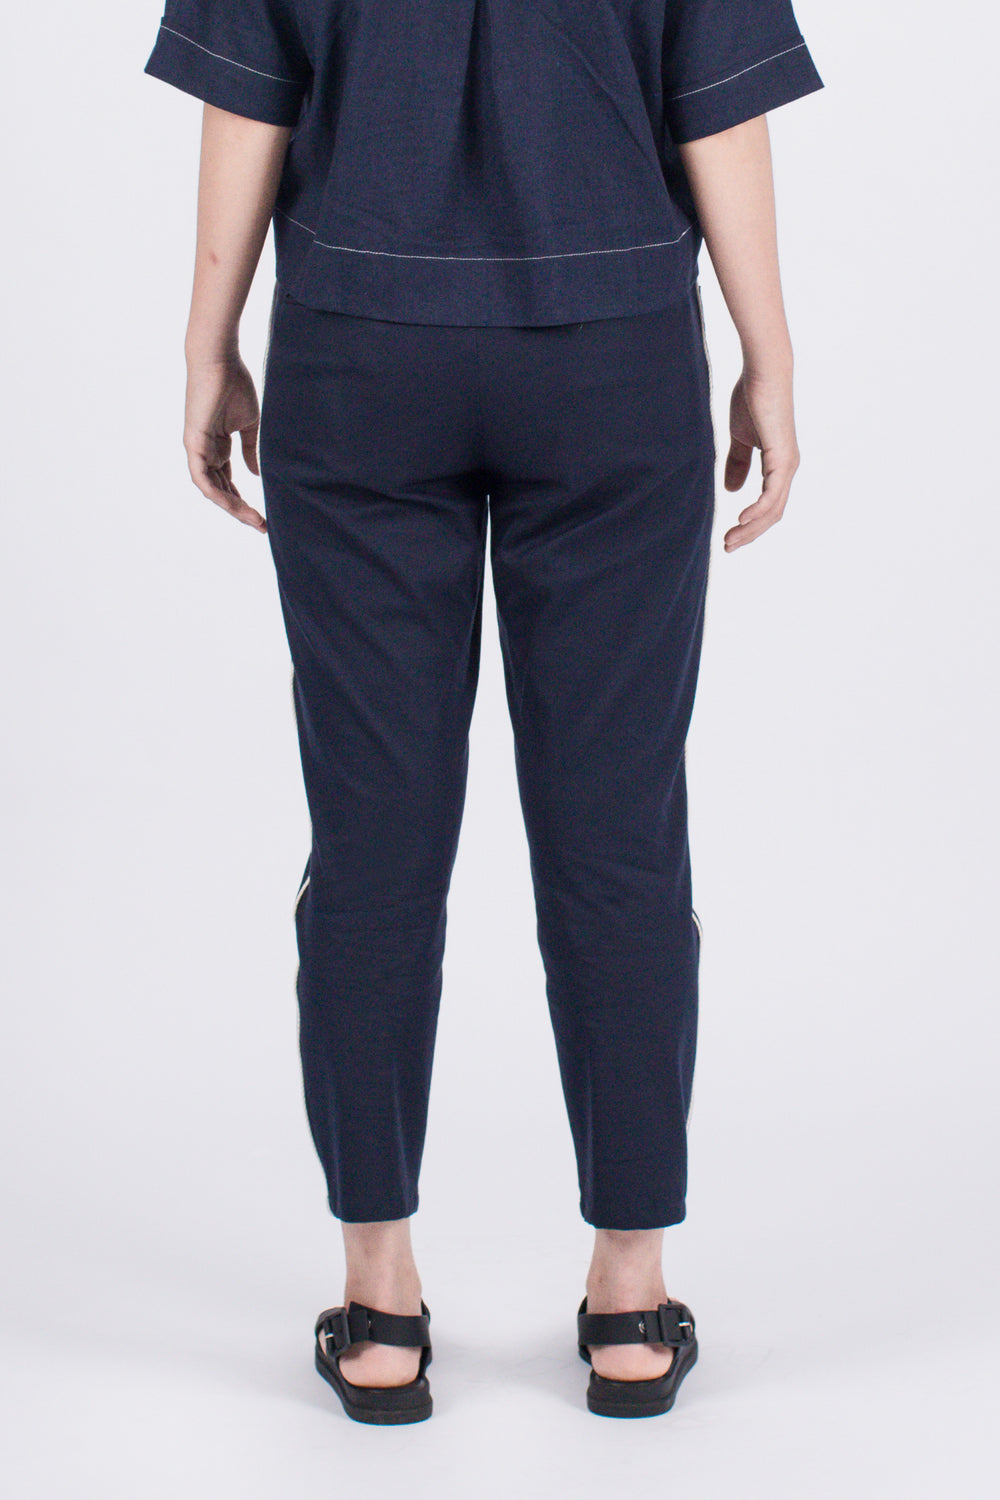 Muzca Esme Ankle Pants Modest Loose Fitting Navy Denim Women Trousers with White Lining and Pockets in 100% Cotton